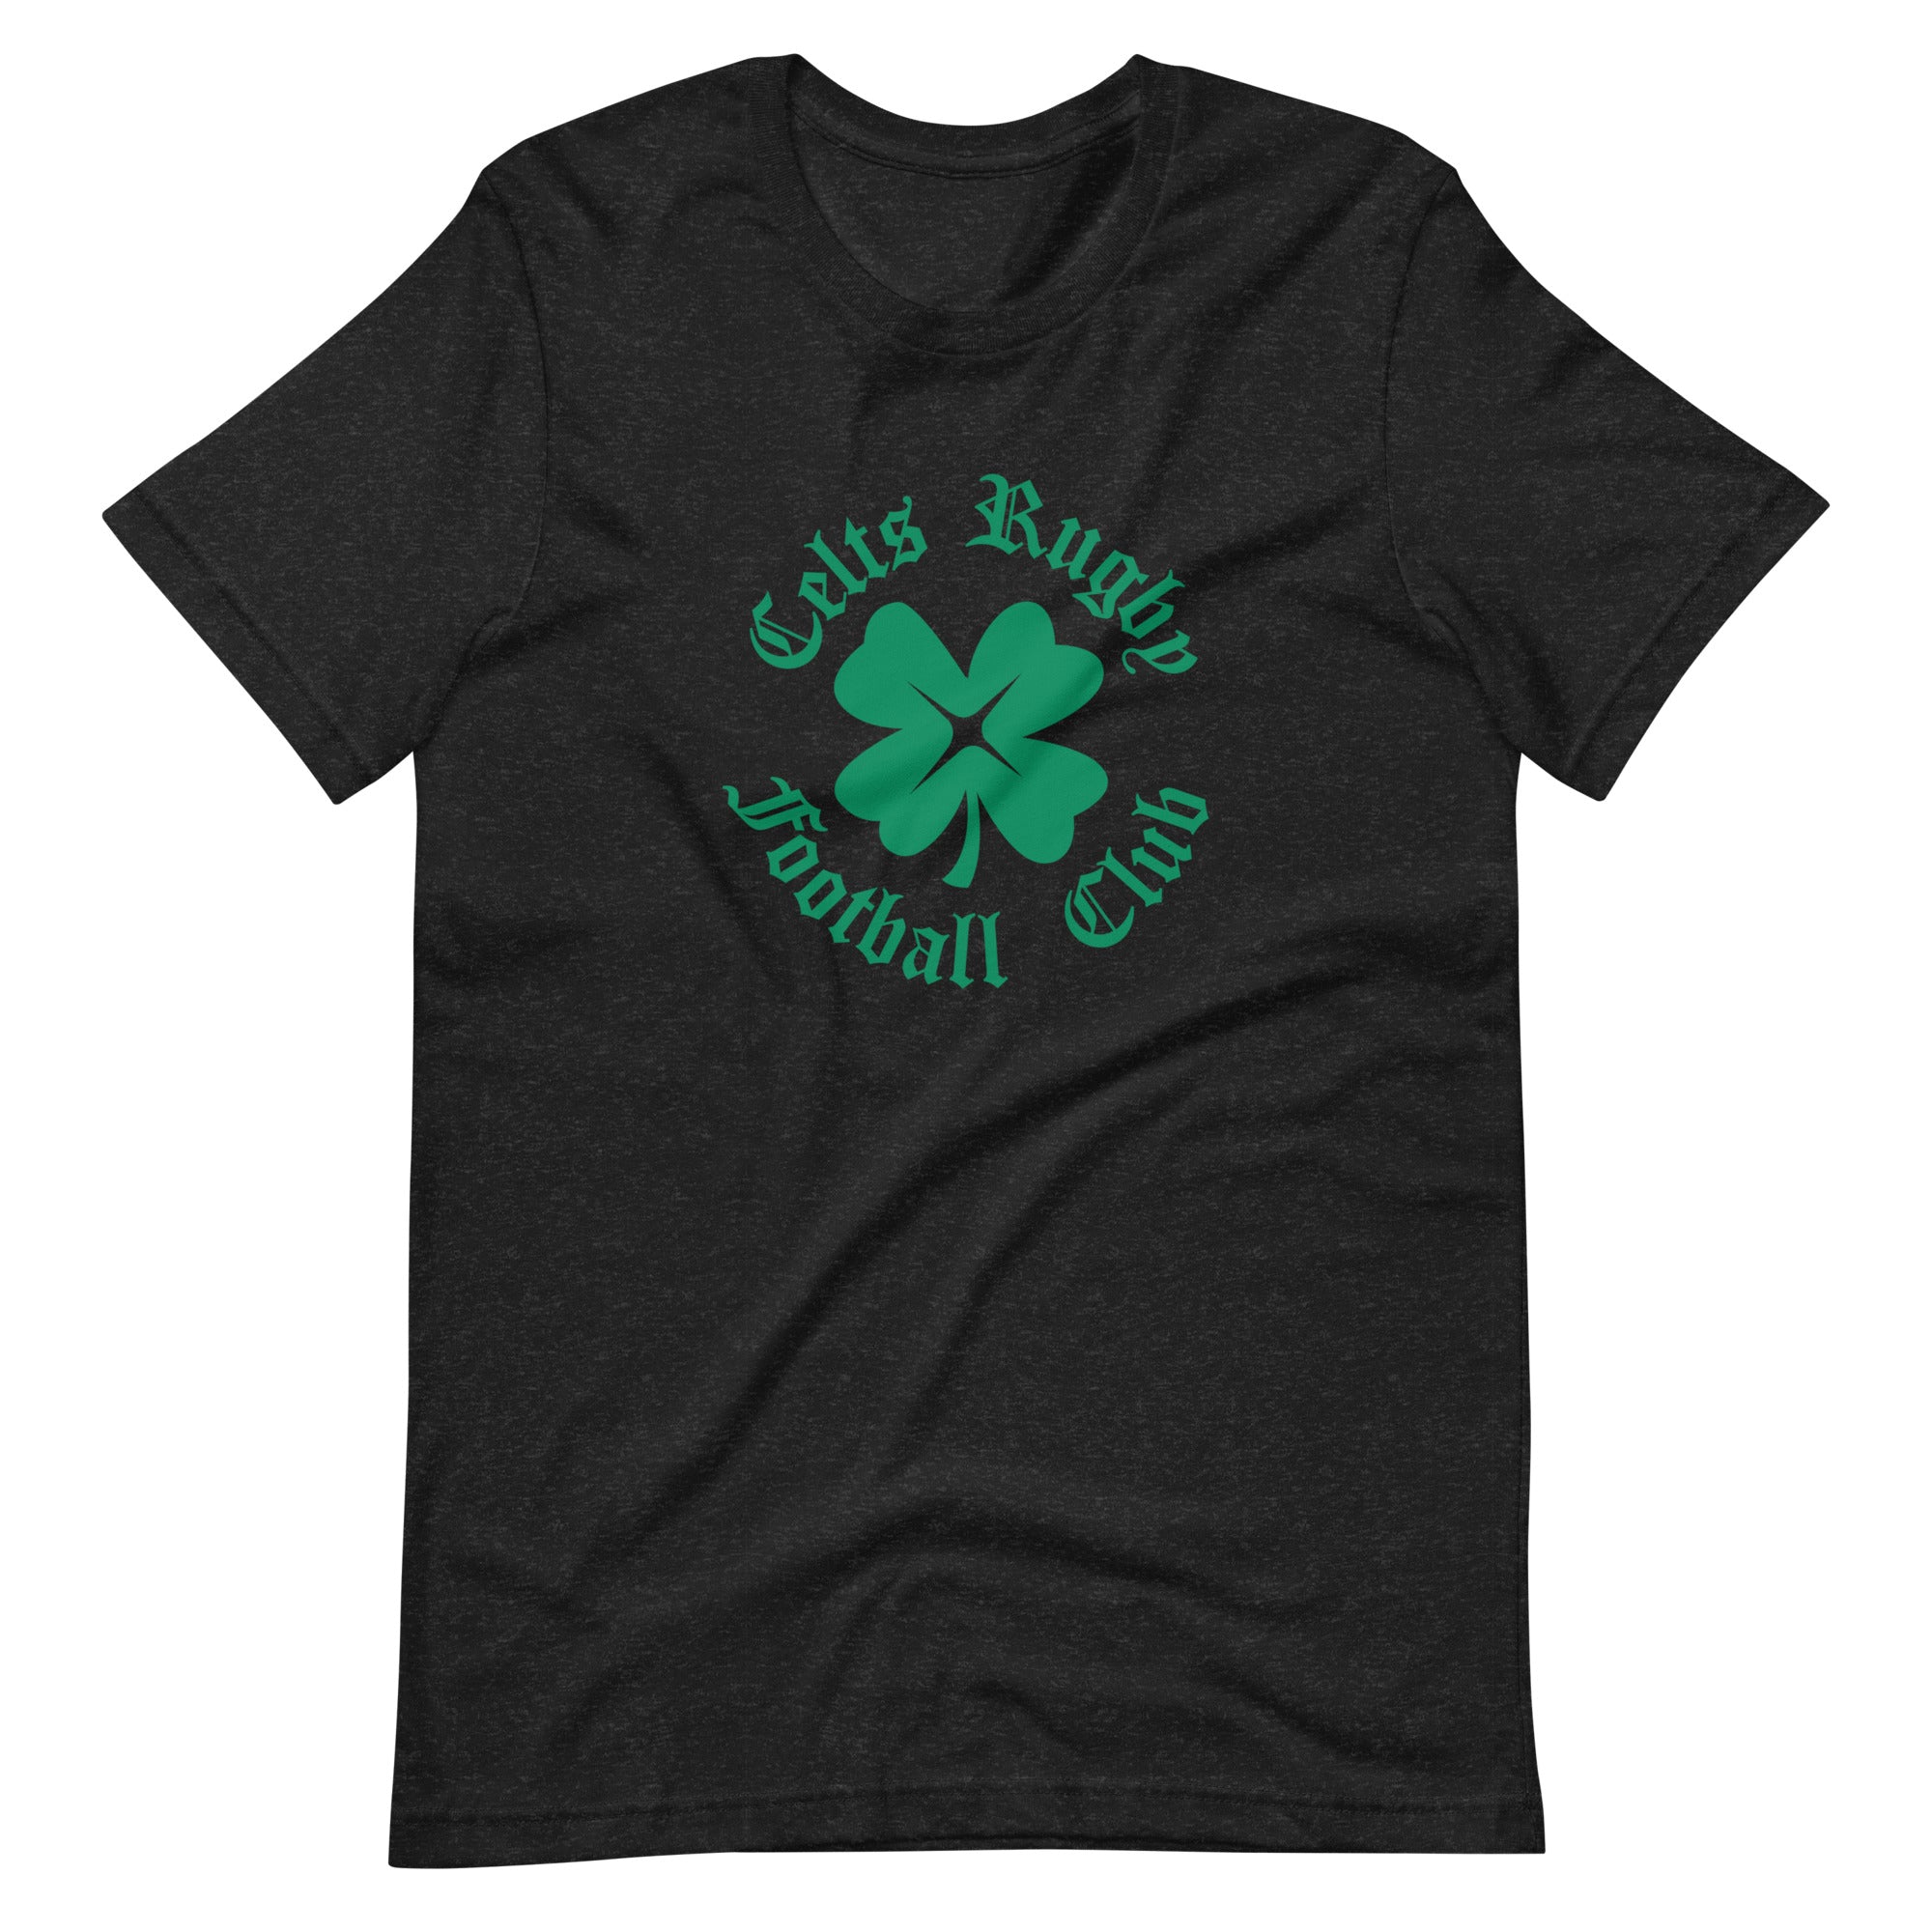 Rugby Imports Springfield Celts Social T-Shirt